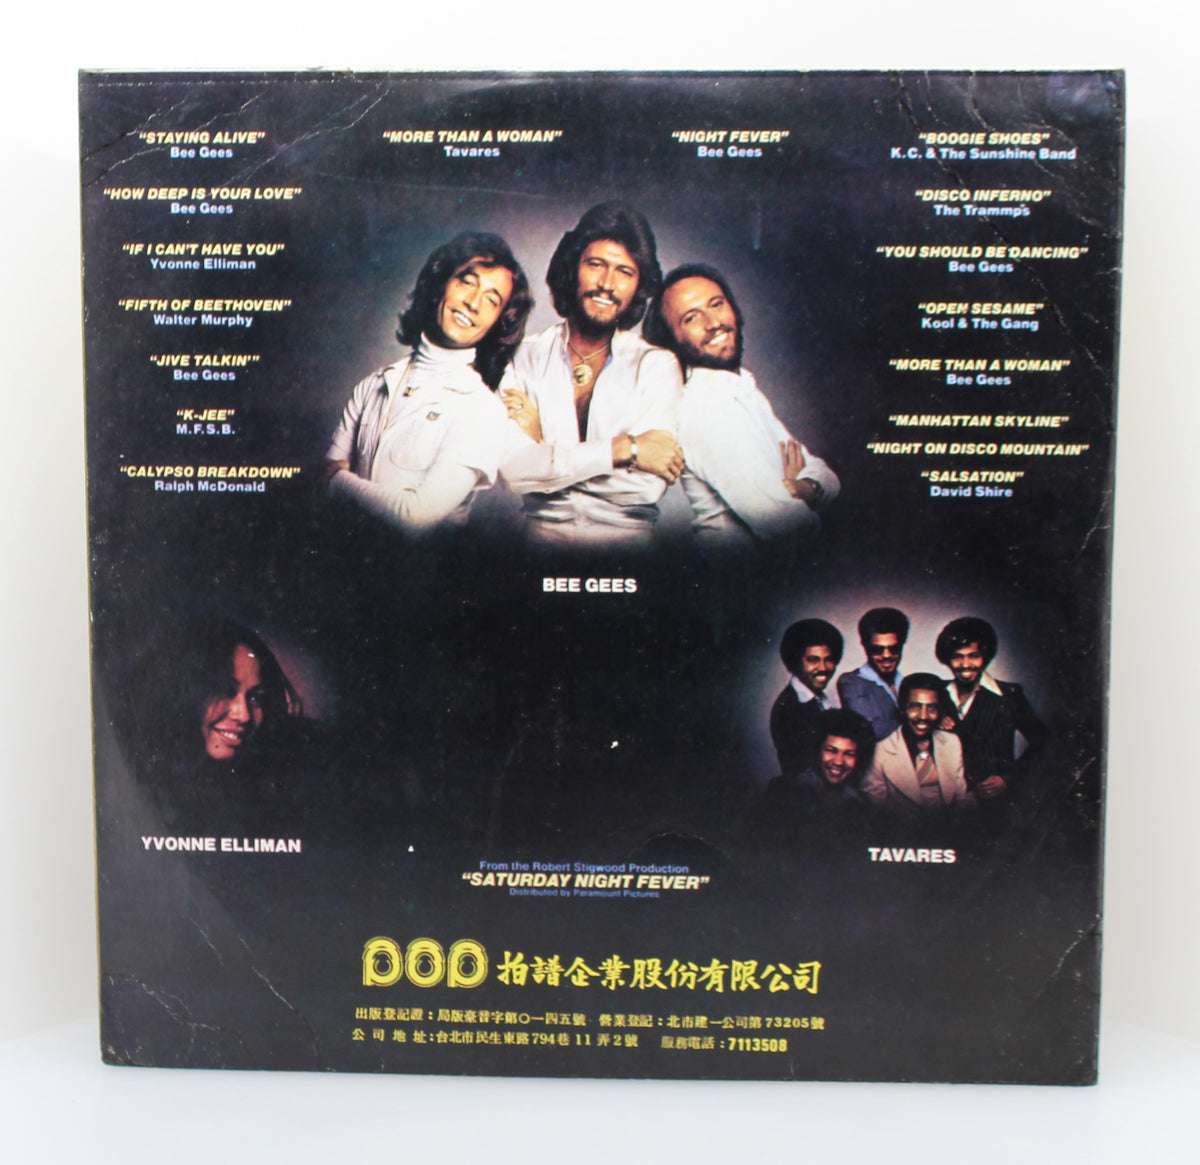 Bee Gees - Various – Saturday Night Fever (The Original Movie Sound Track), 2 x Vinyl, LP, Album, Unofficial Release, Taiwan 1977